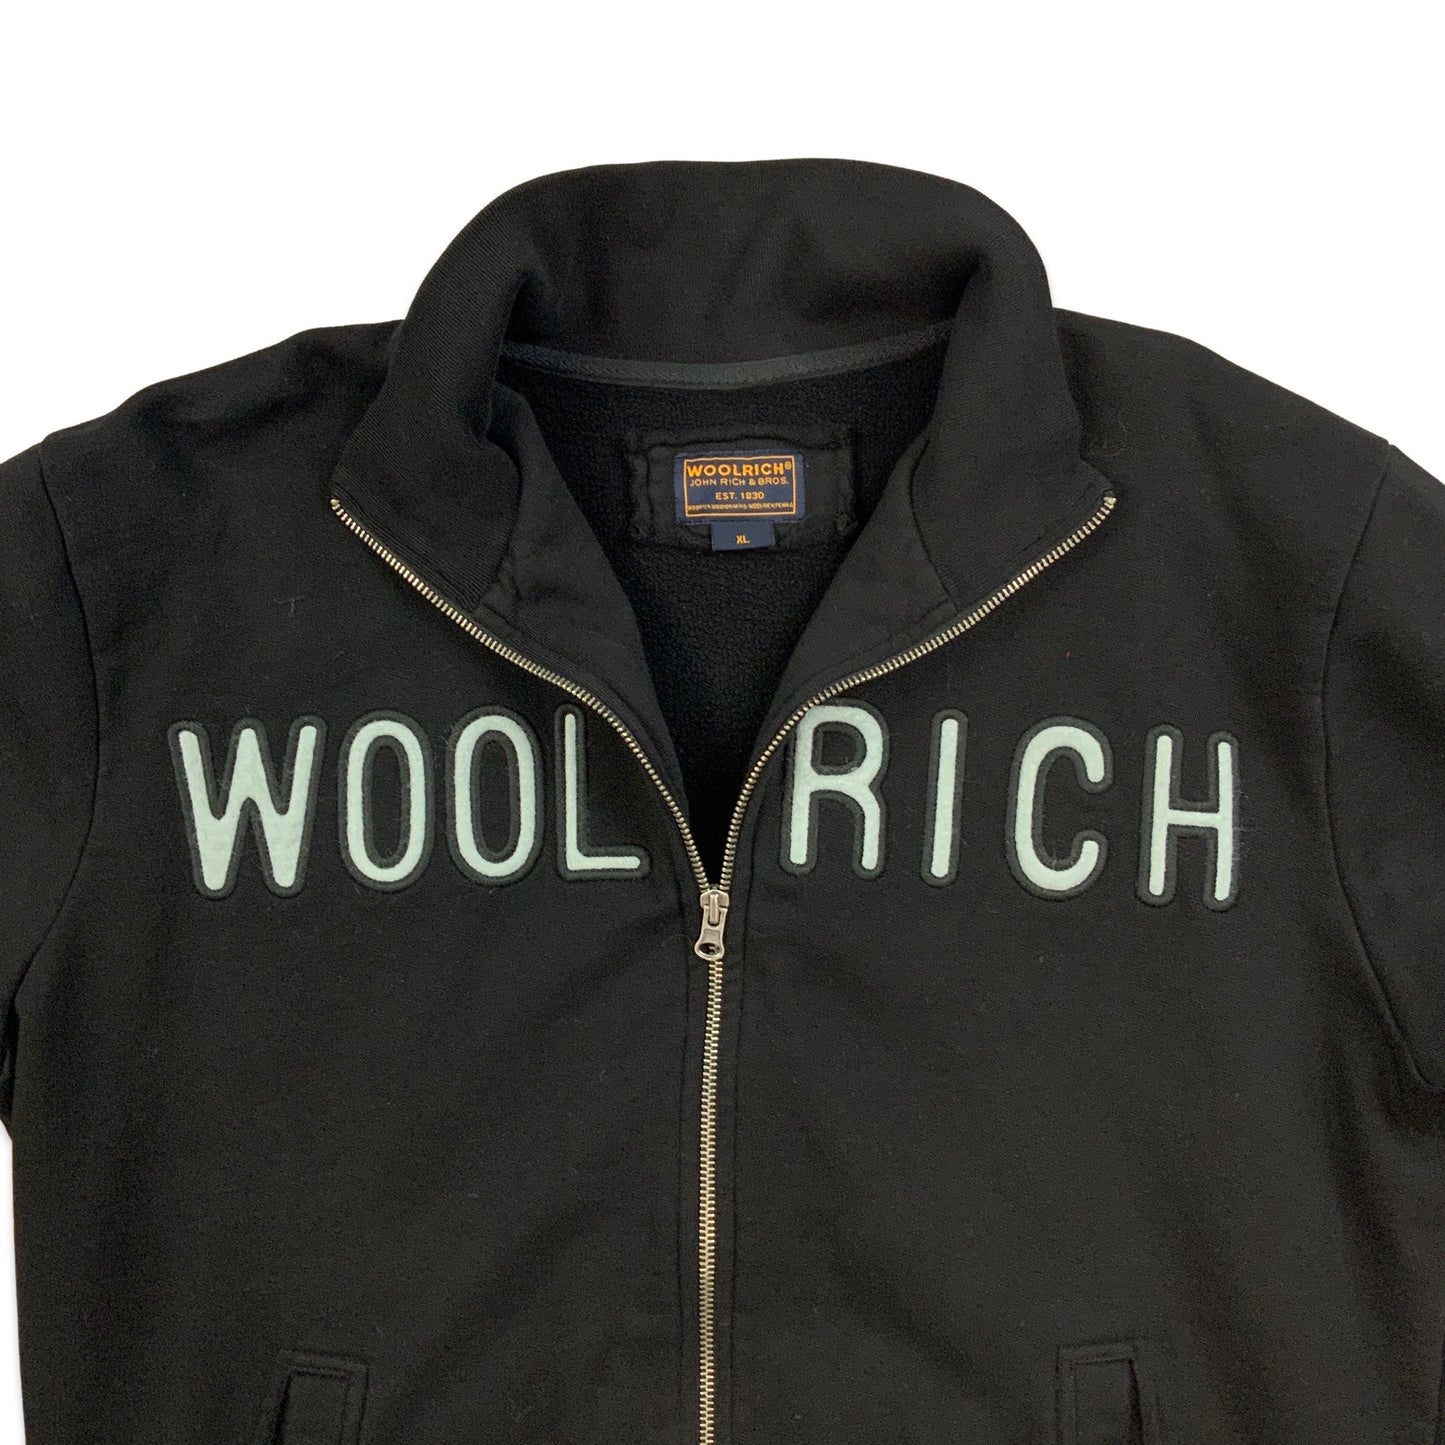 Woolrich Spell Out Zip Up Track Jacket L XL